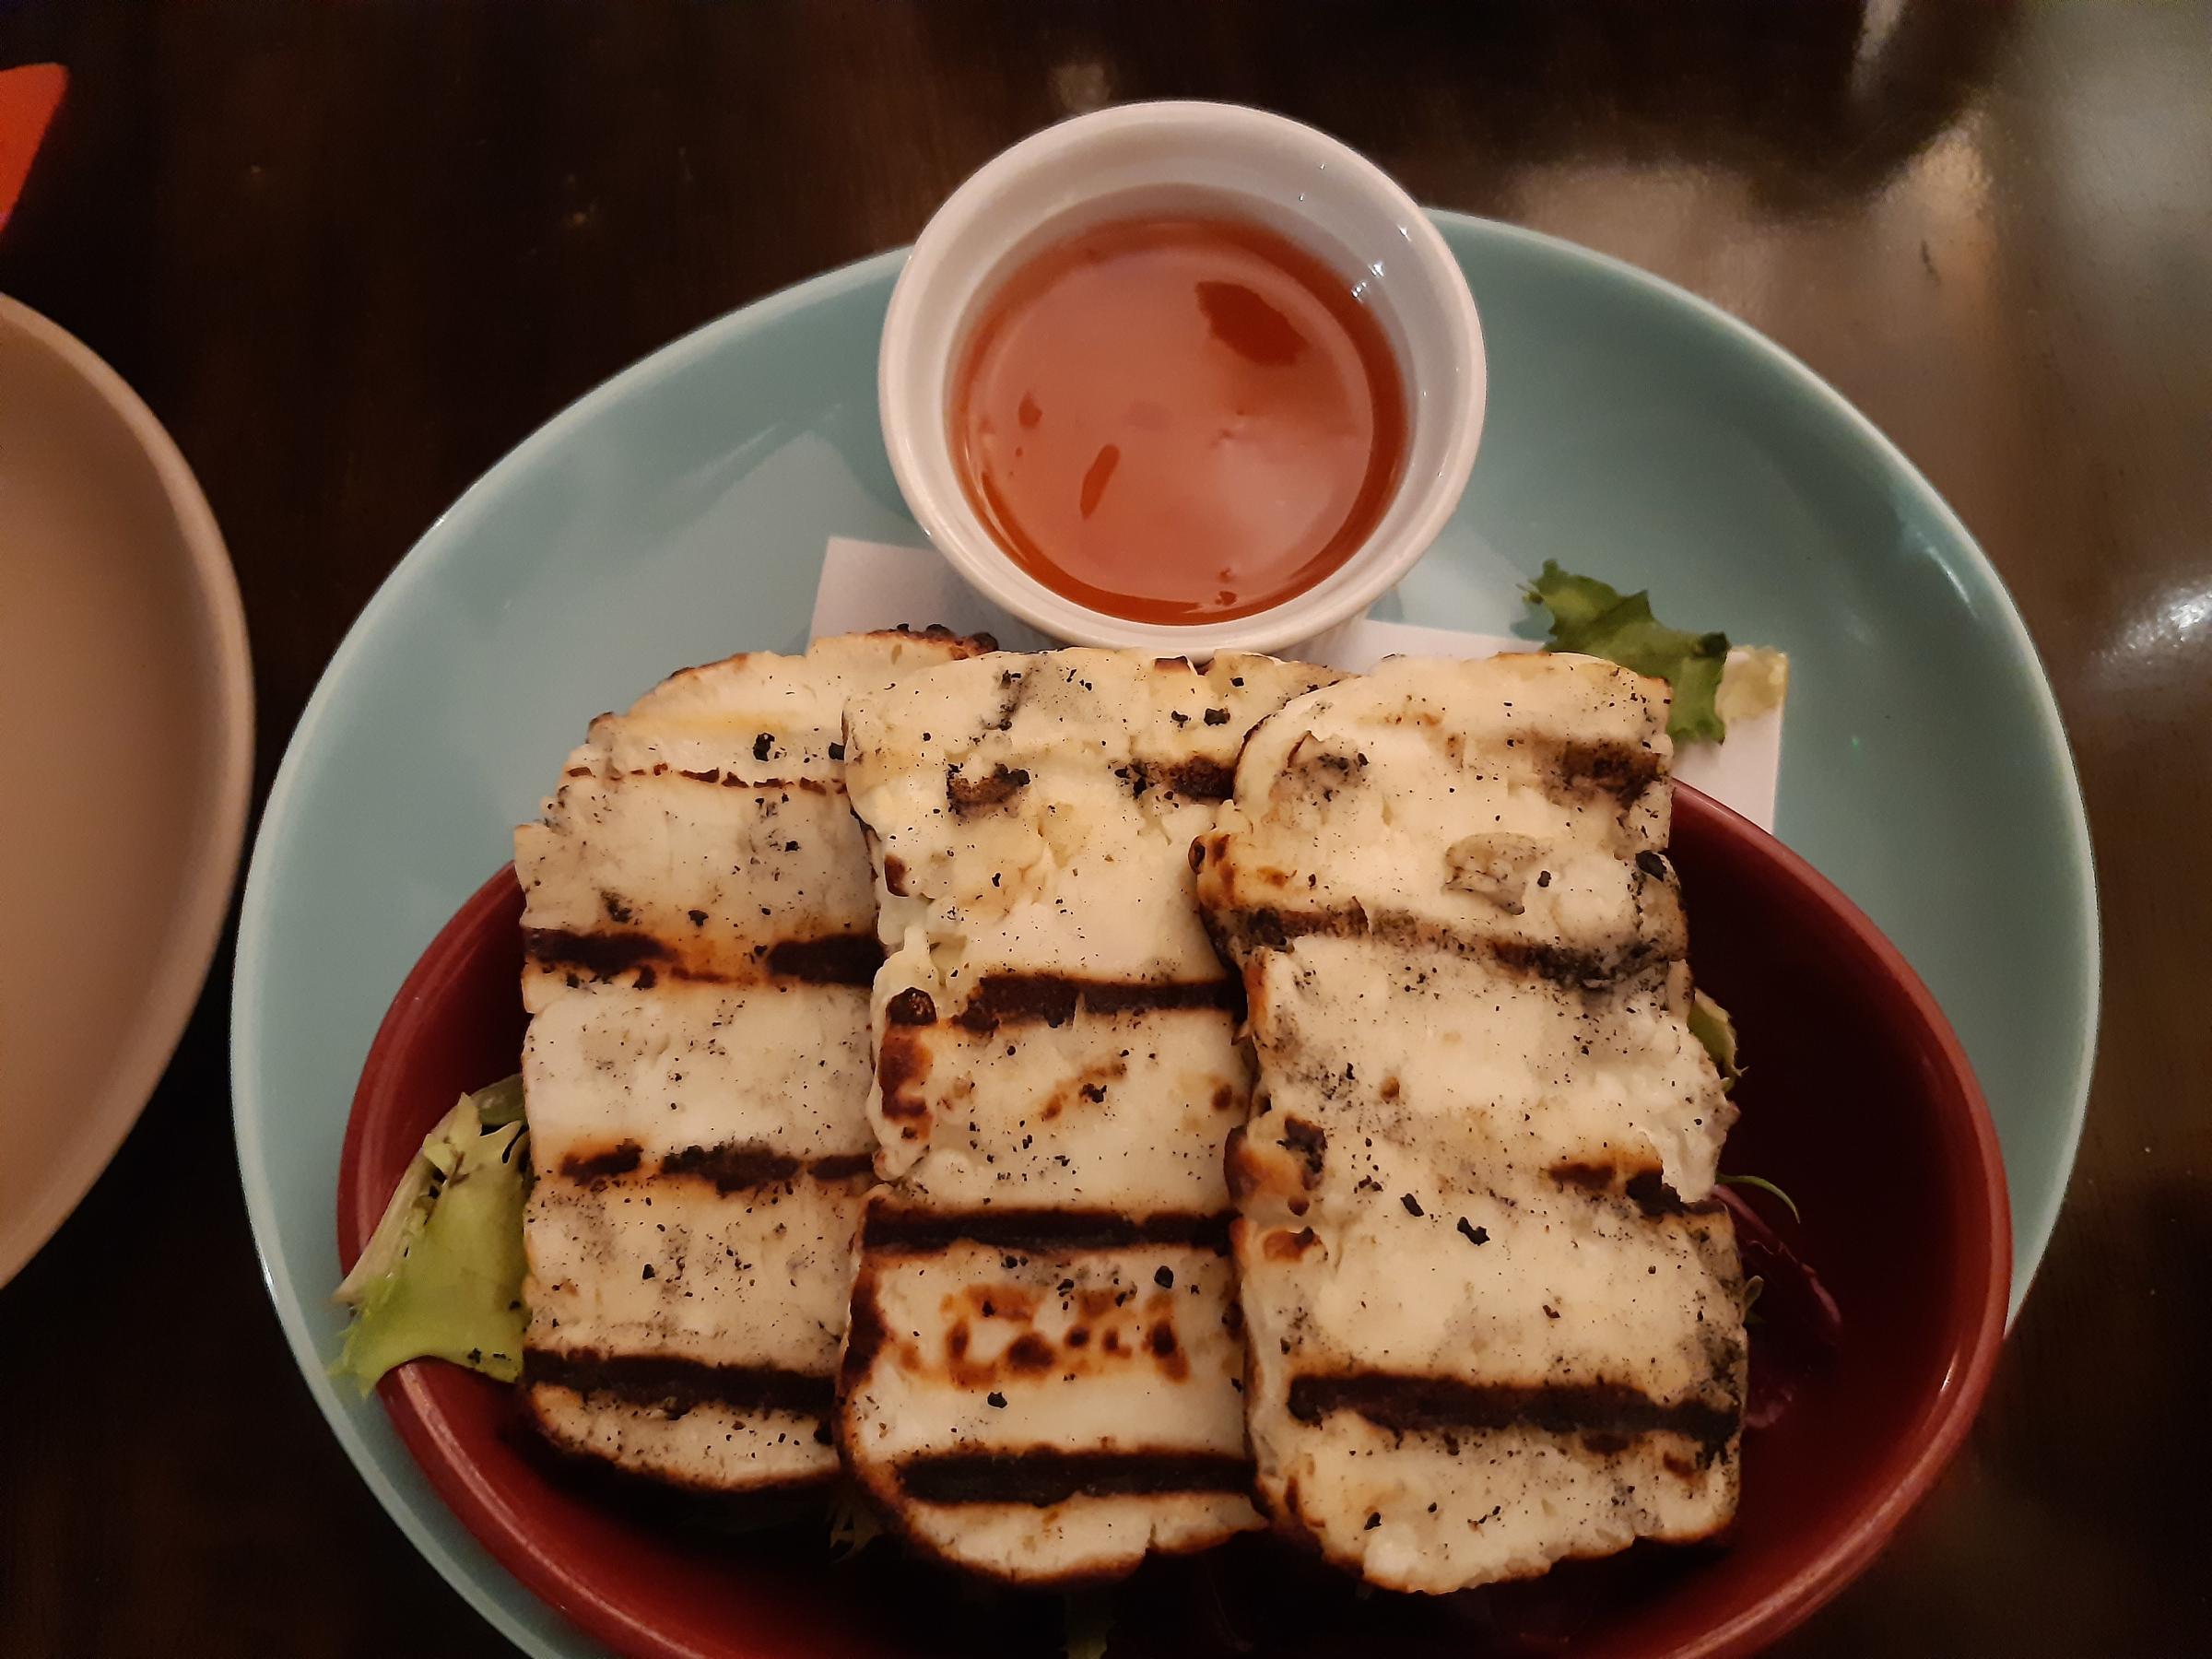 Grilled halloumi at the Fox & Grapes in Hawarden.